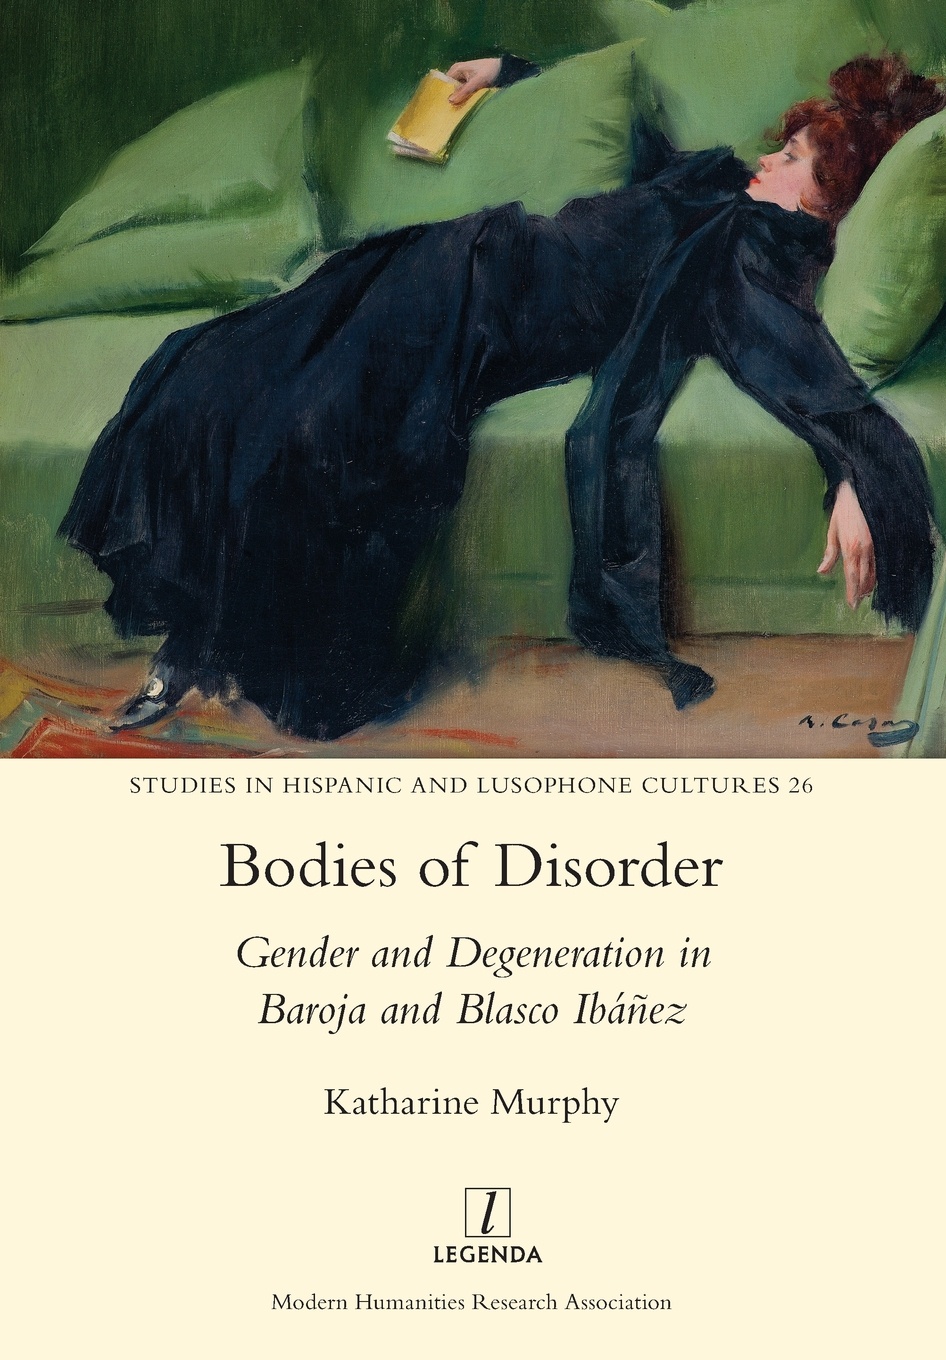 Bodies of Disorder. Gender and Degeneration in Baroja and Blasco Ibanez